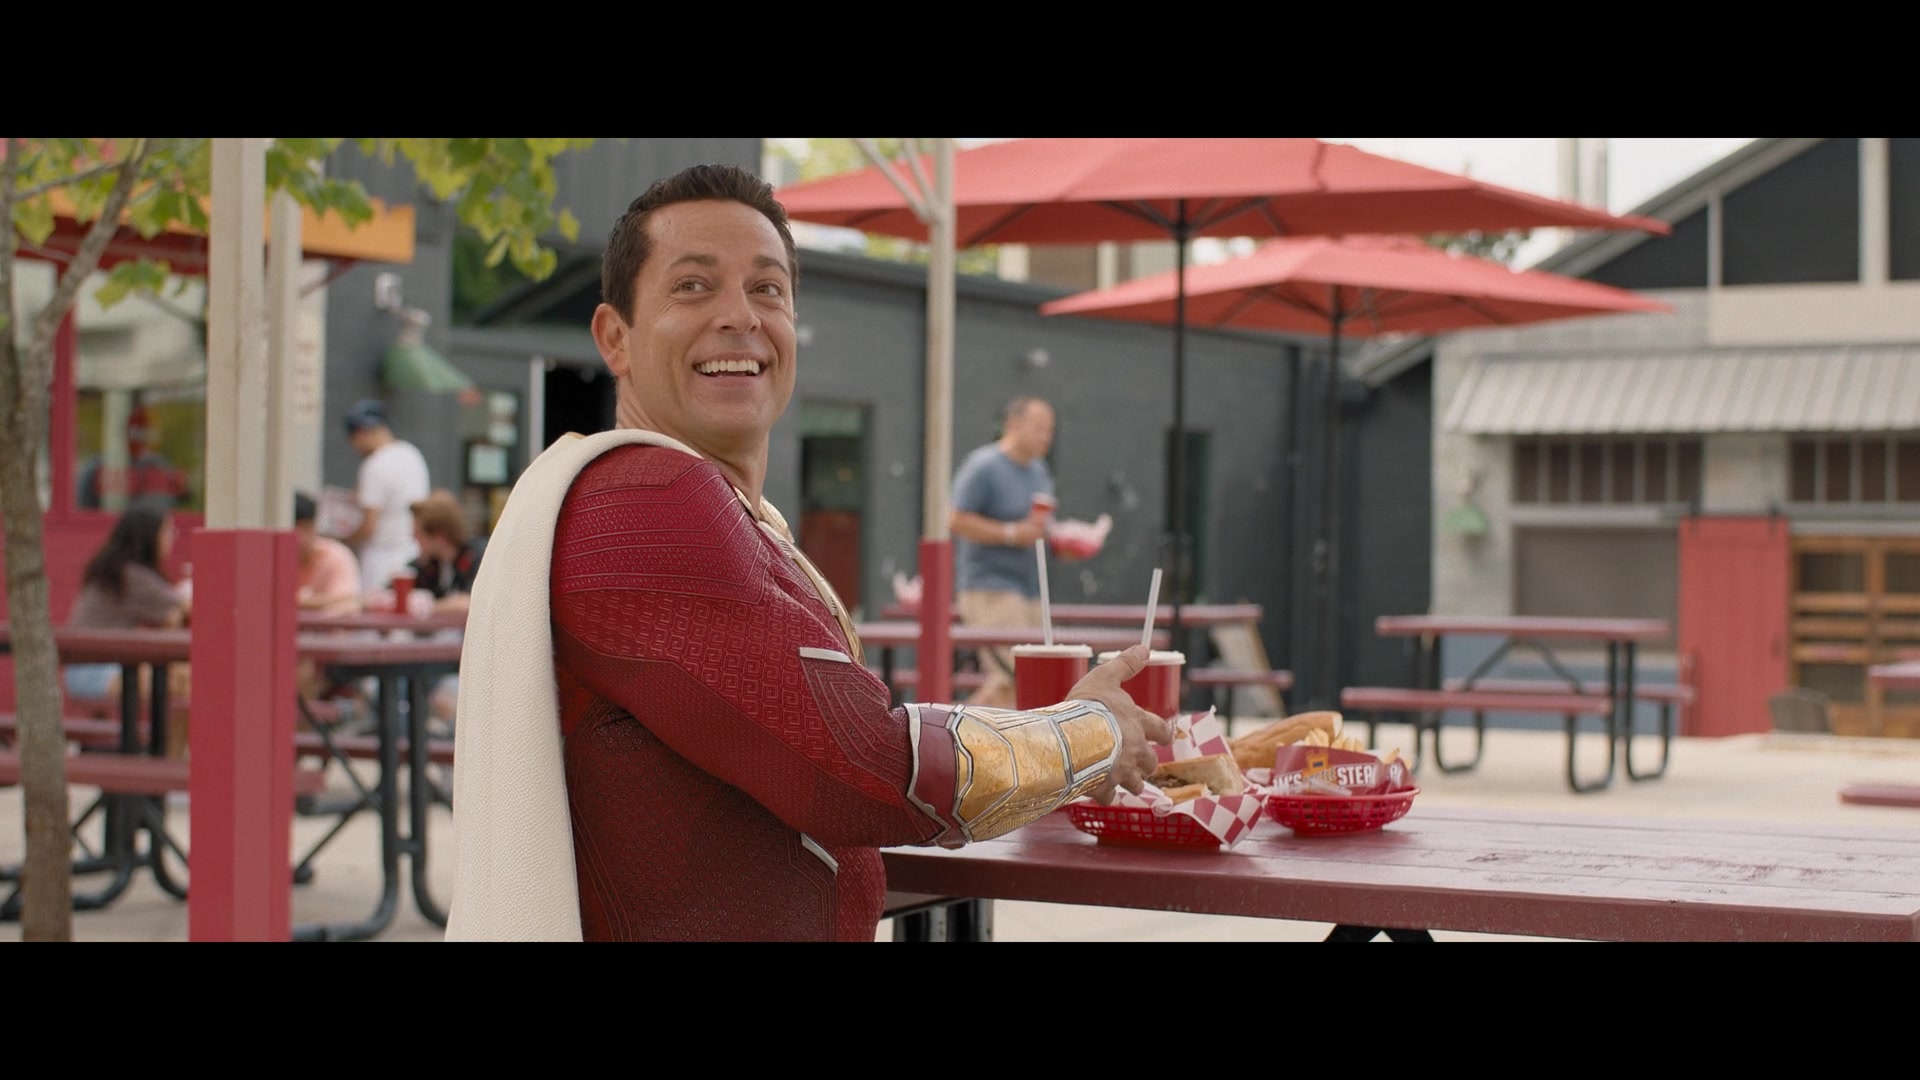 Shazam (Zachary Levi) prepares for a lunch meeting in Shazam! Fury of the Gods (2023), Warner Bros. Pictures